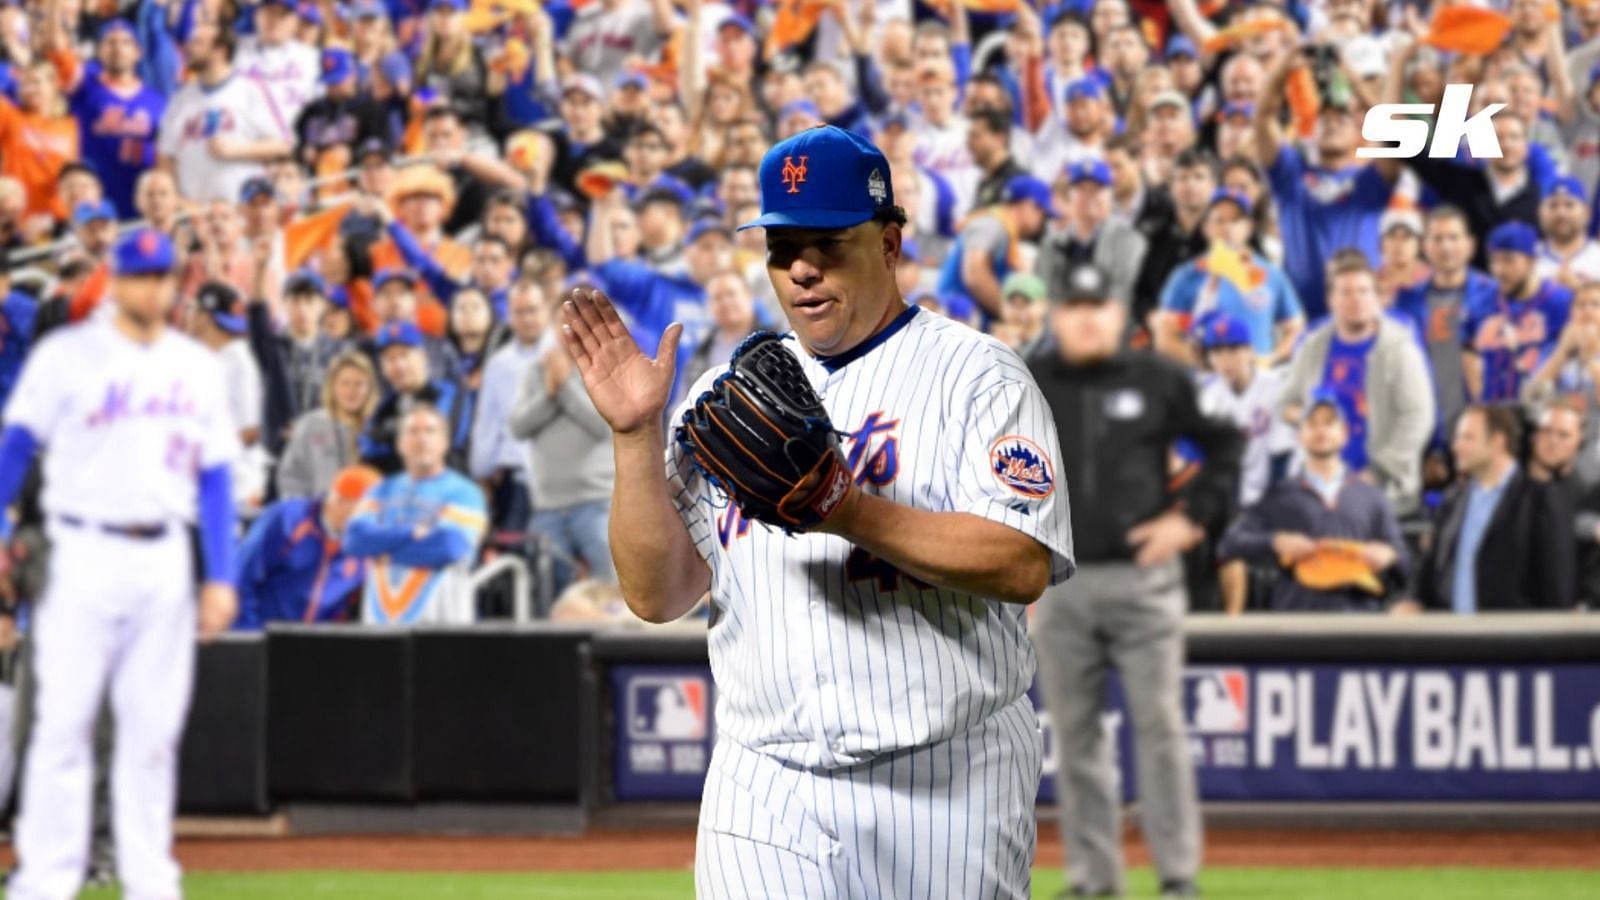 Yankees pitcher Bartolo Colon could be back in time to face Mets 